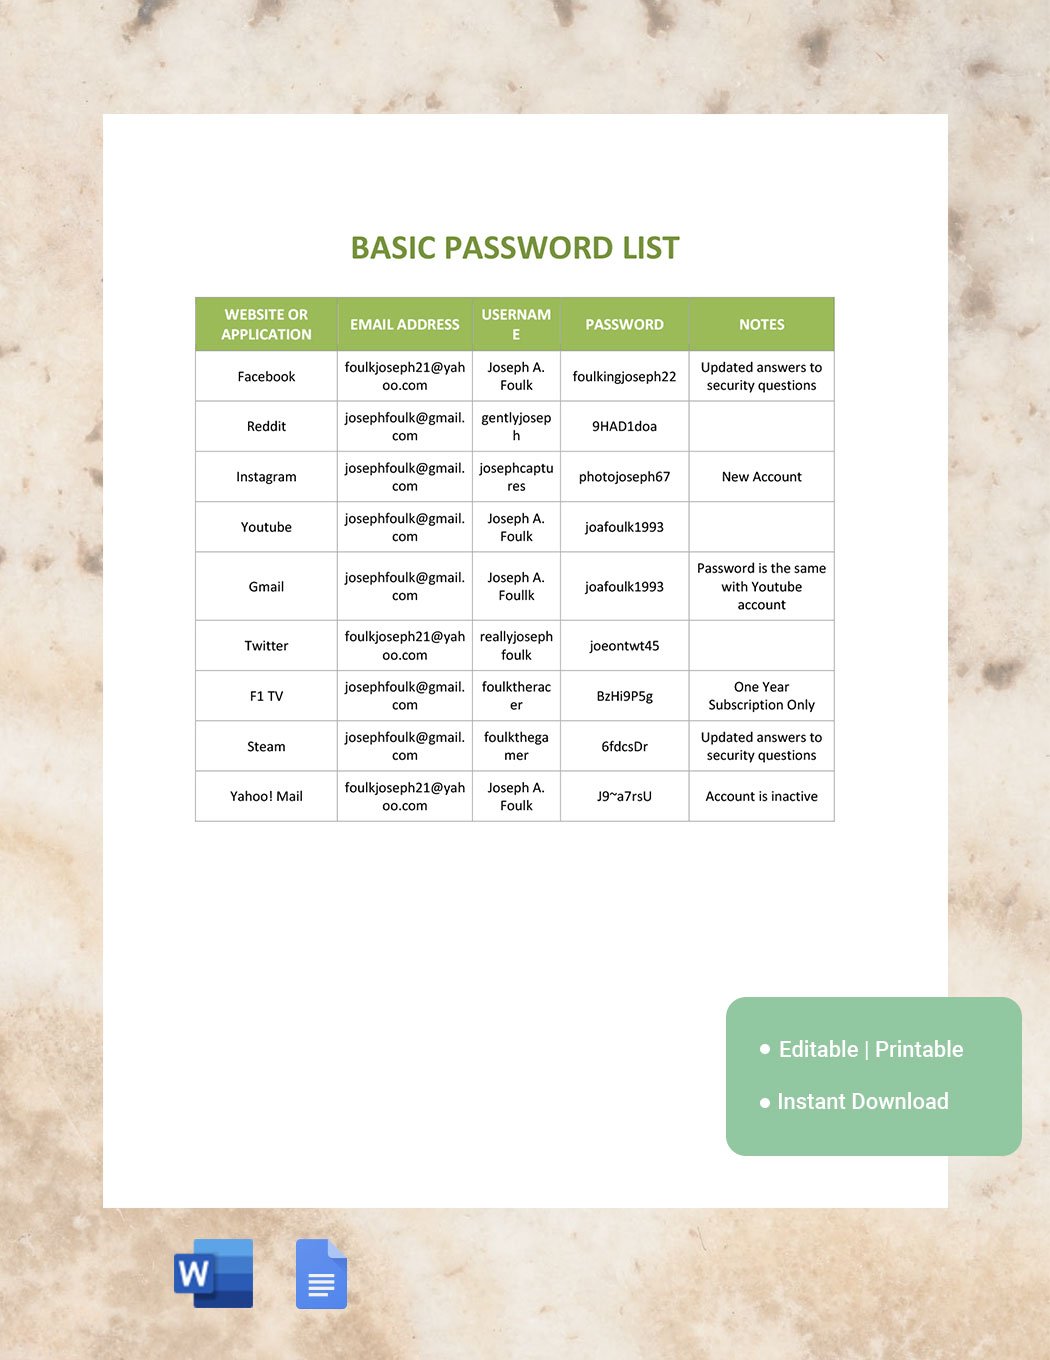 Free Basic Password List Template in Word, Google Docs